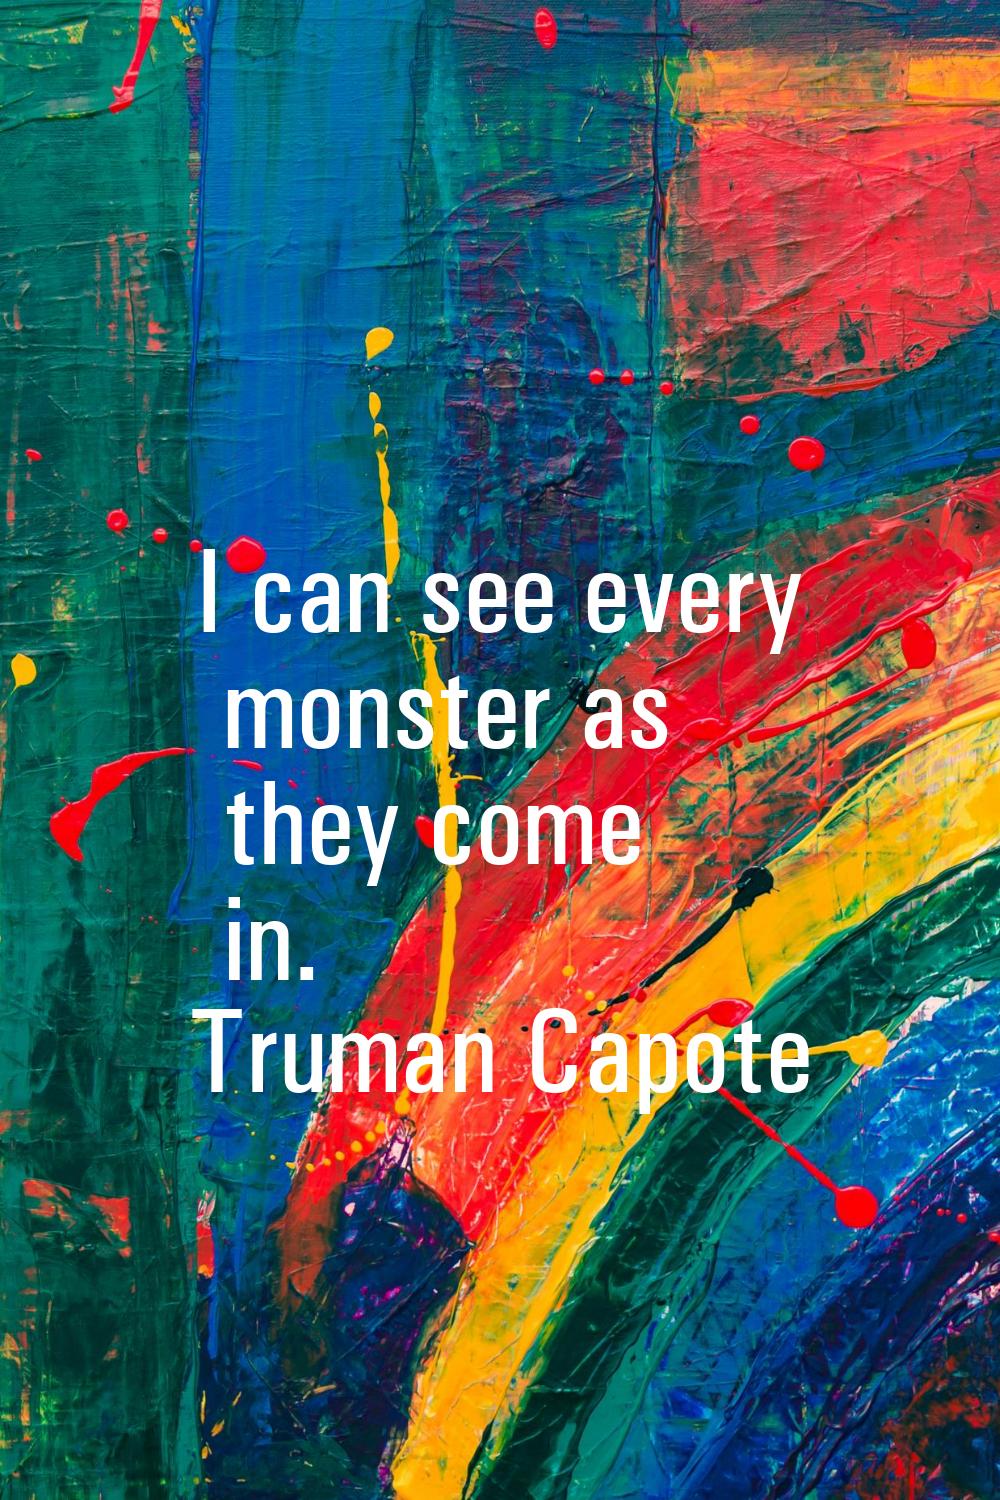 I can see every monster as they come in.